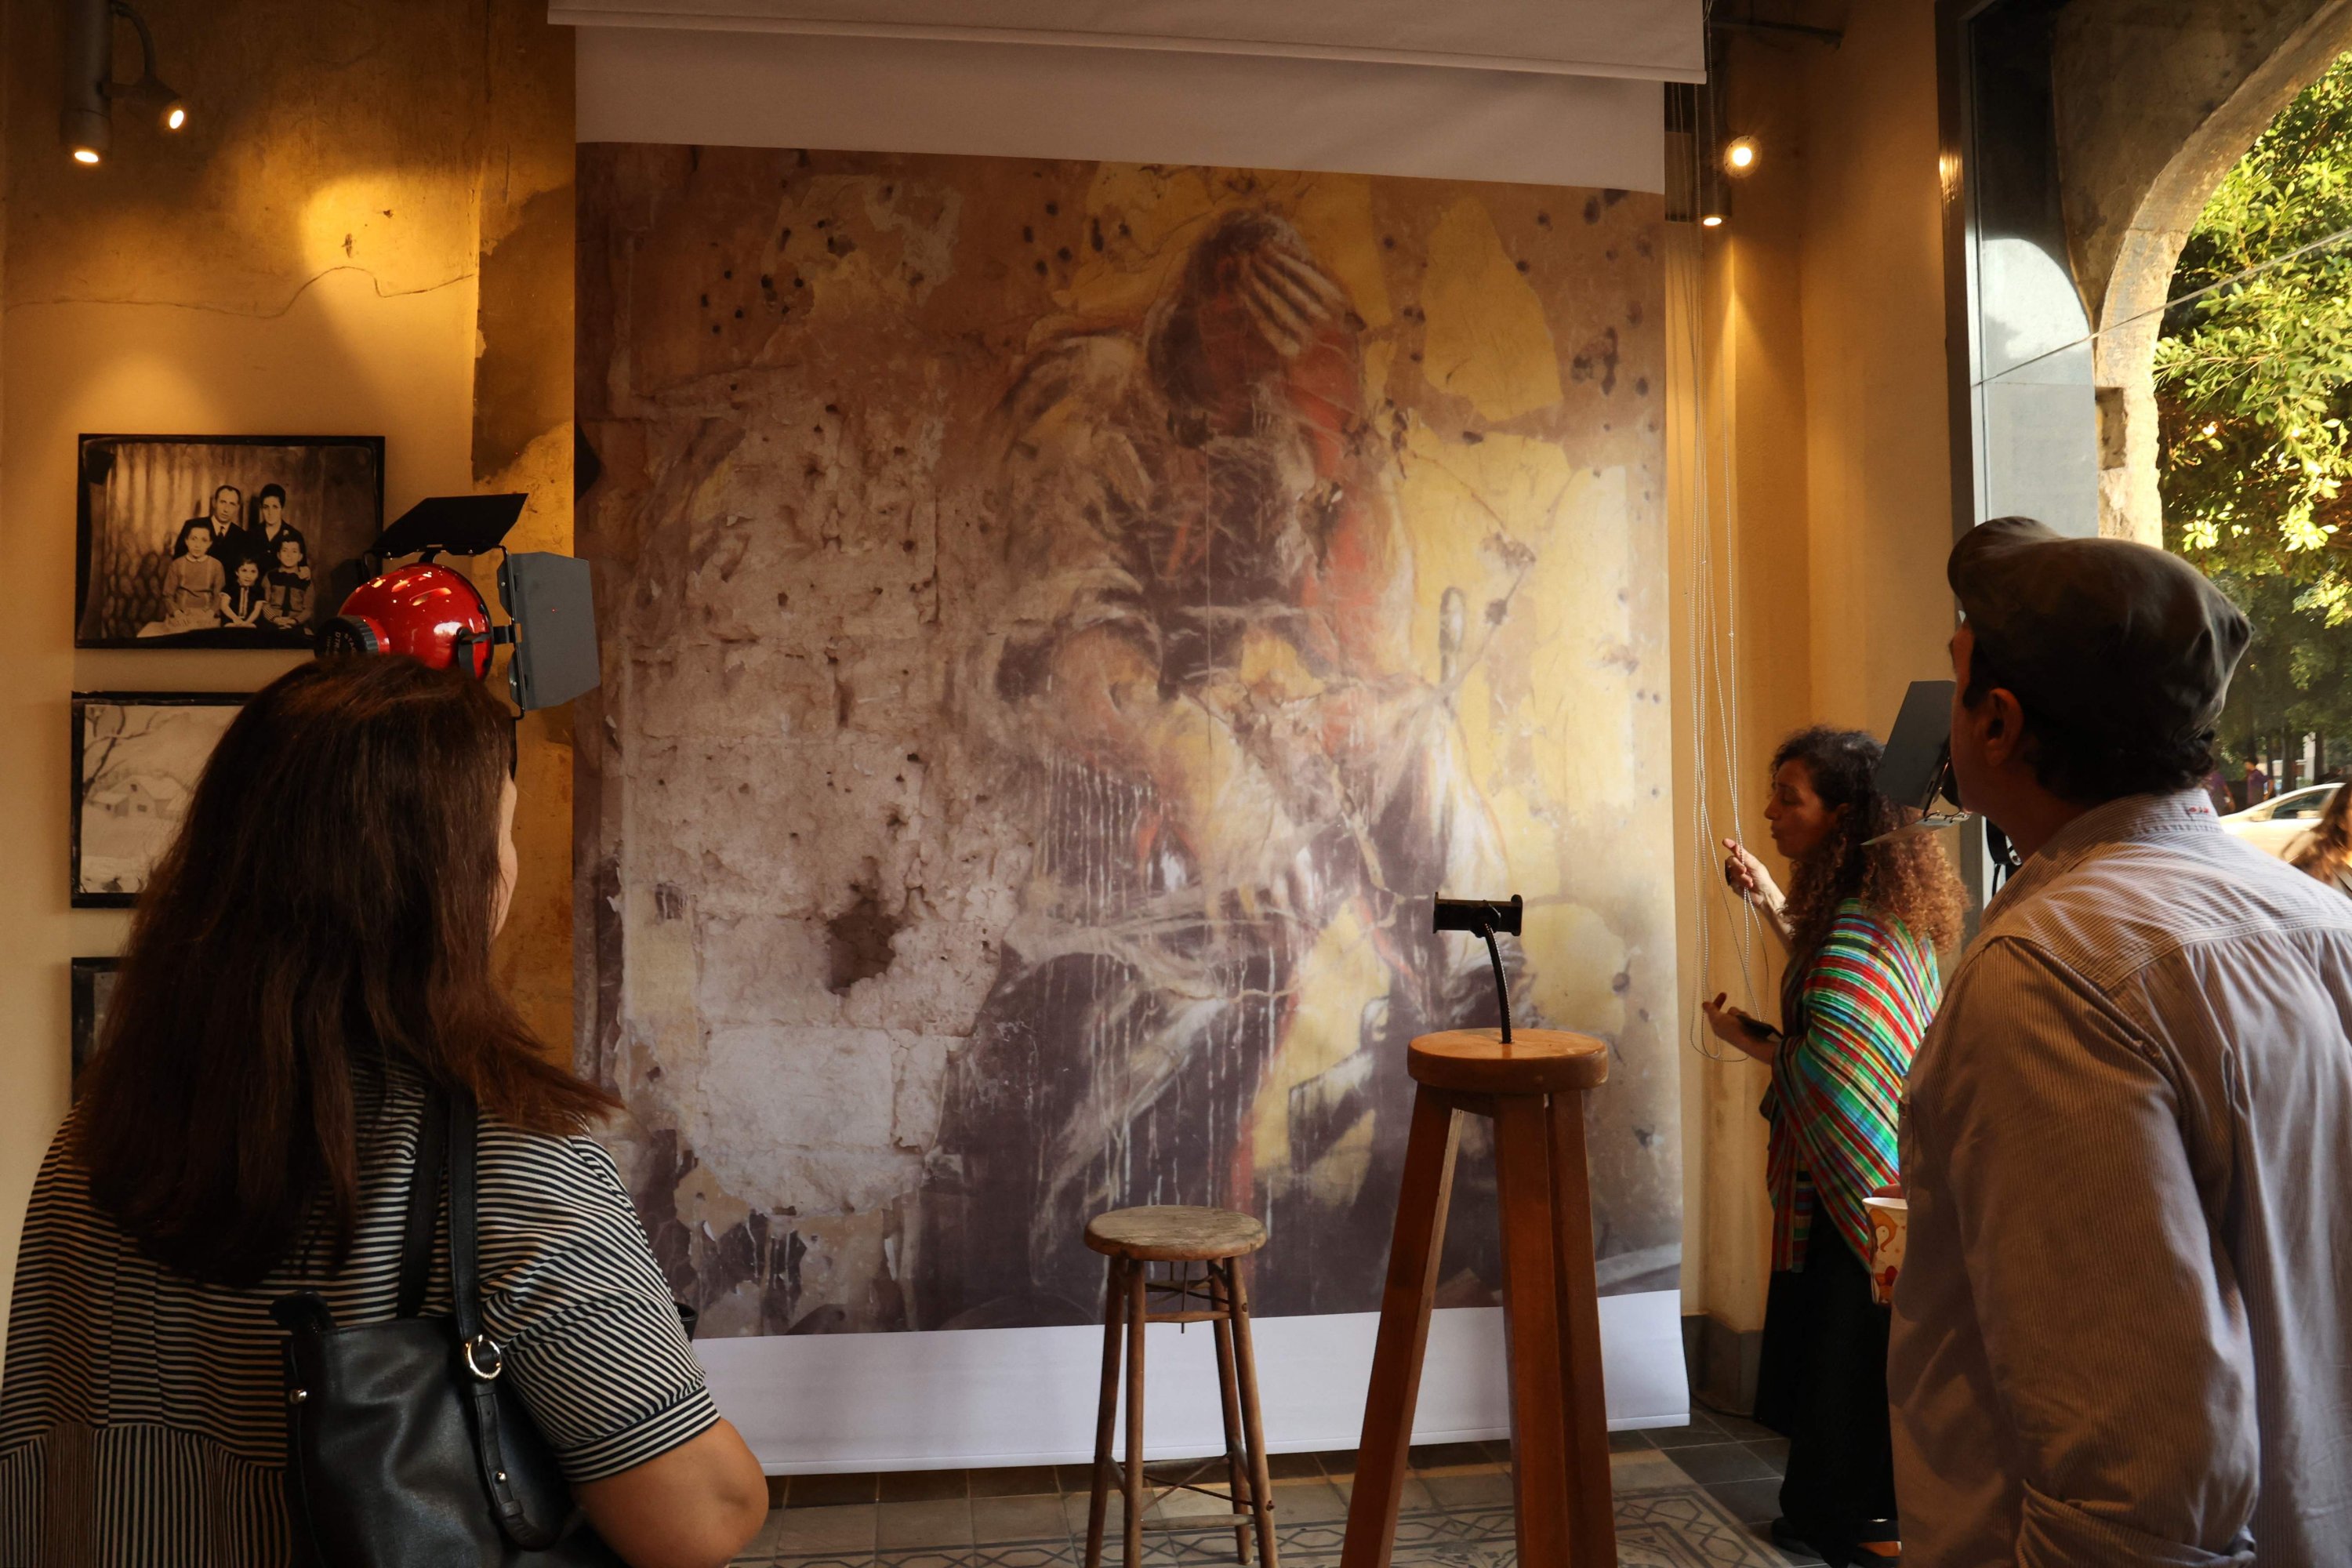 People in an exhibition titled "Allo, Beirut?," that shows archives of Lebanon's troubled past fused with artistic depictions of a grim present, at the capital's Beit Beirut heritage-house-turned-museum, Beirut, Lebanon, Sept. 15, 2022. (AFP Photo)